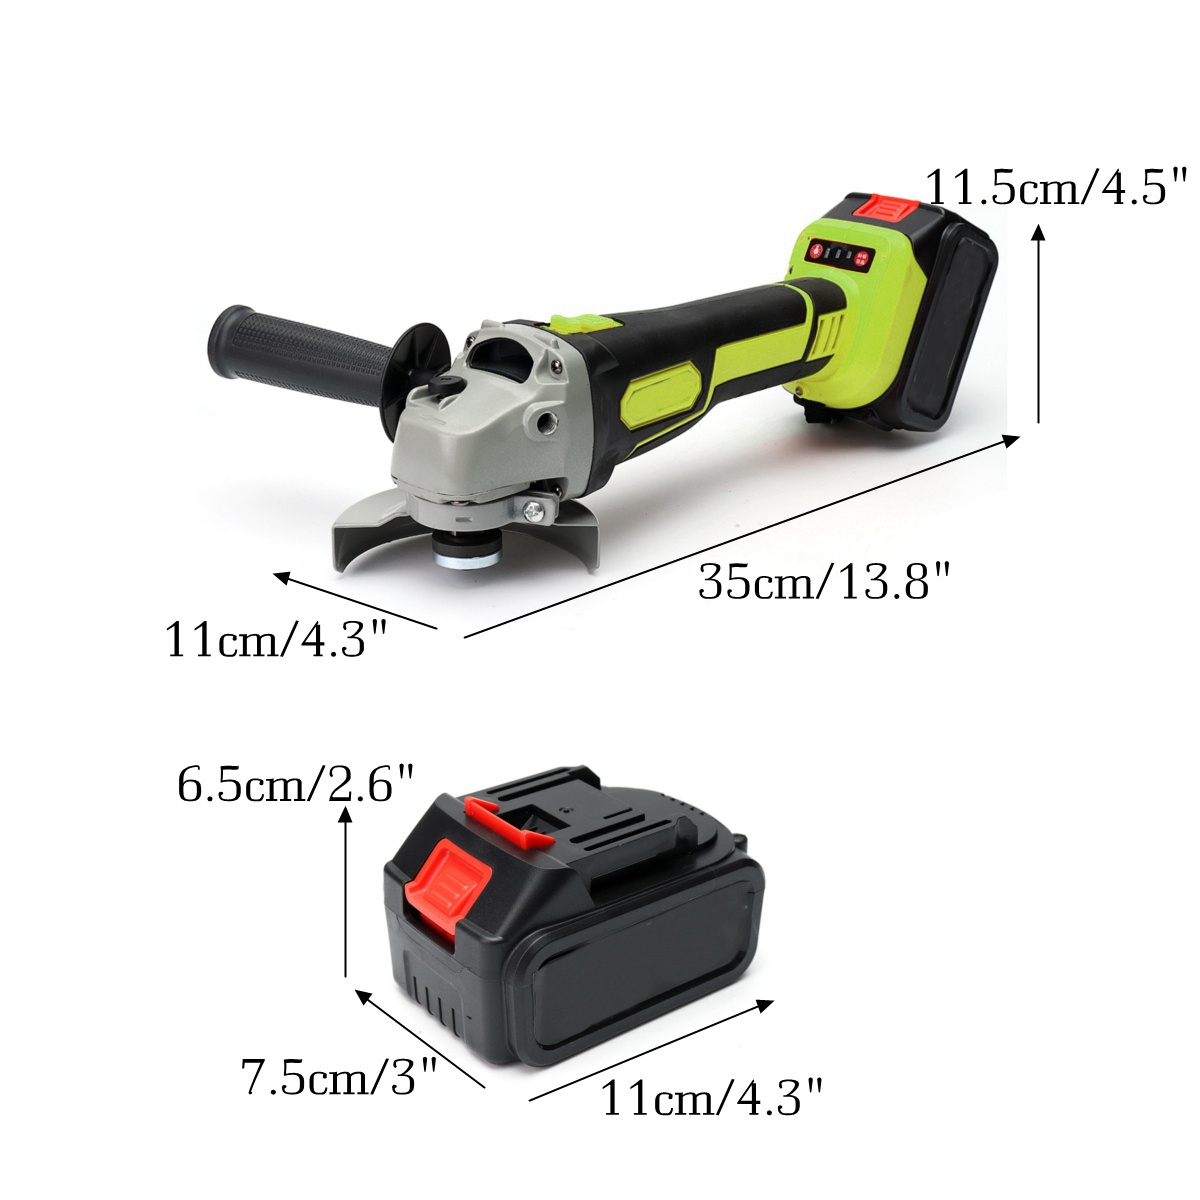 188VF218VF-Brushless-Cordless-Angle-Grinder-Electric-Power-Angle-Grinding-Cutting-W-1-or-2-Li-ion-Ba-1431177-9